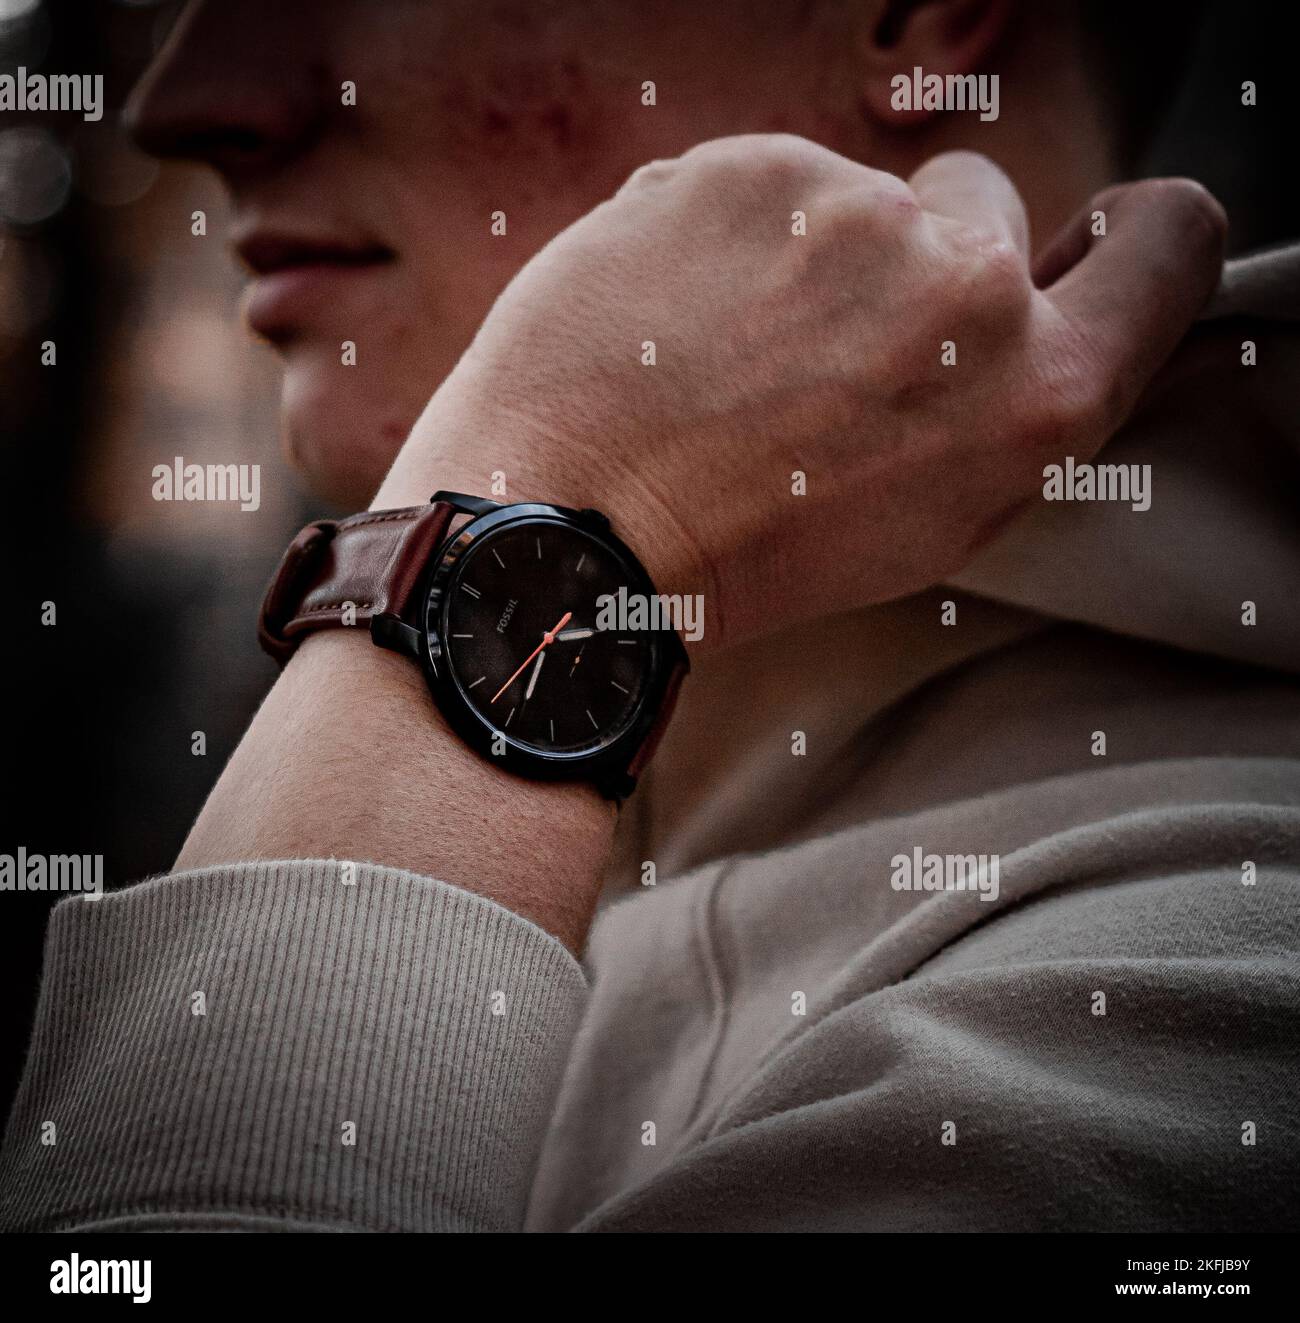 A man wearing a watch while adjusting his hood Stock Photo